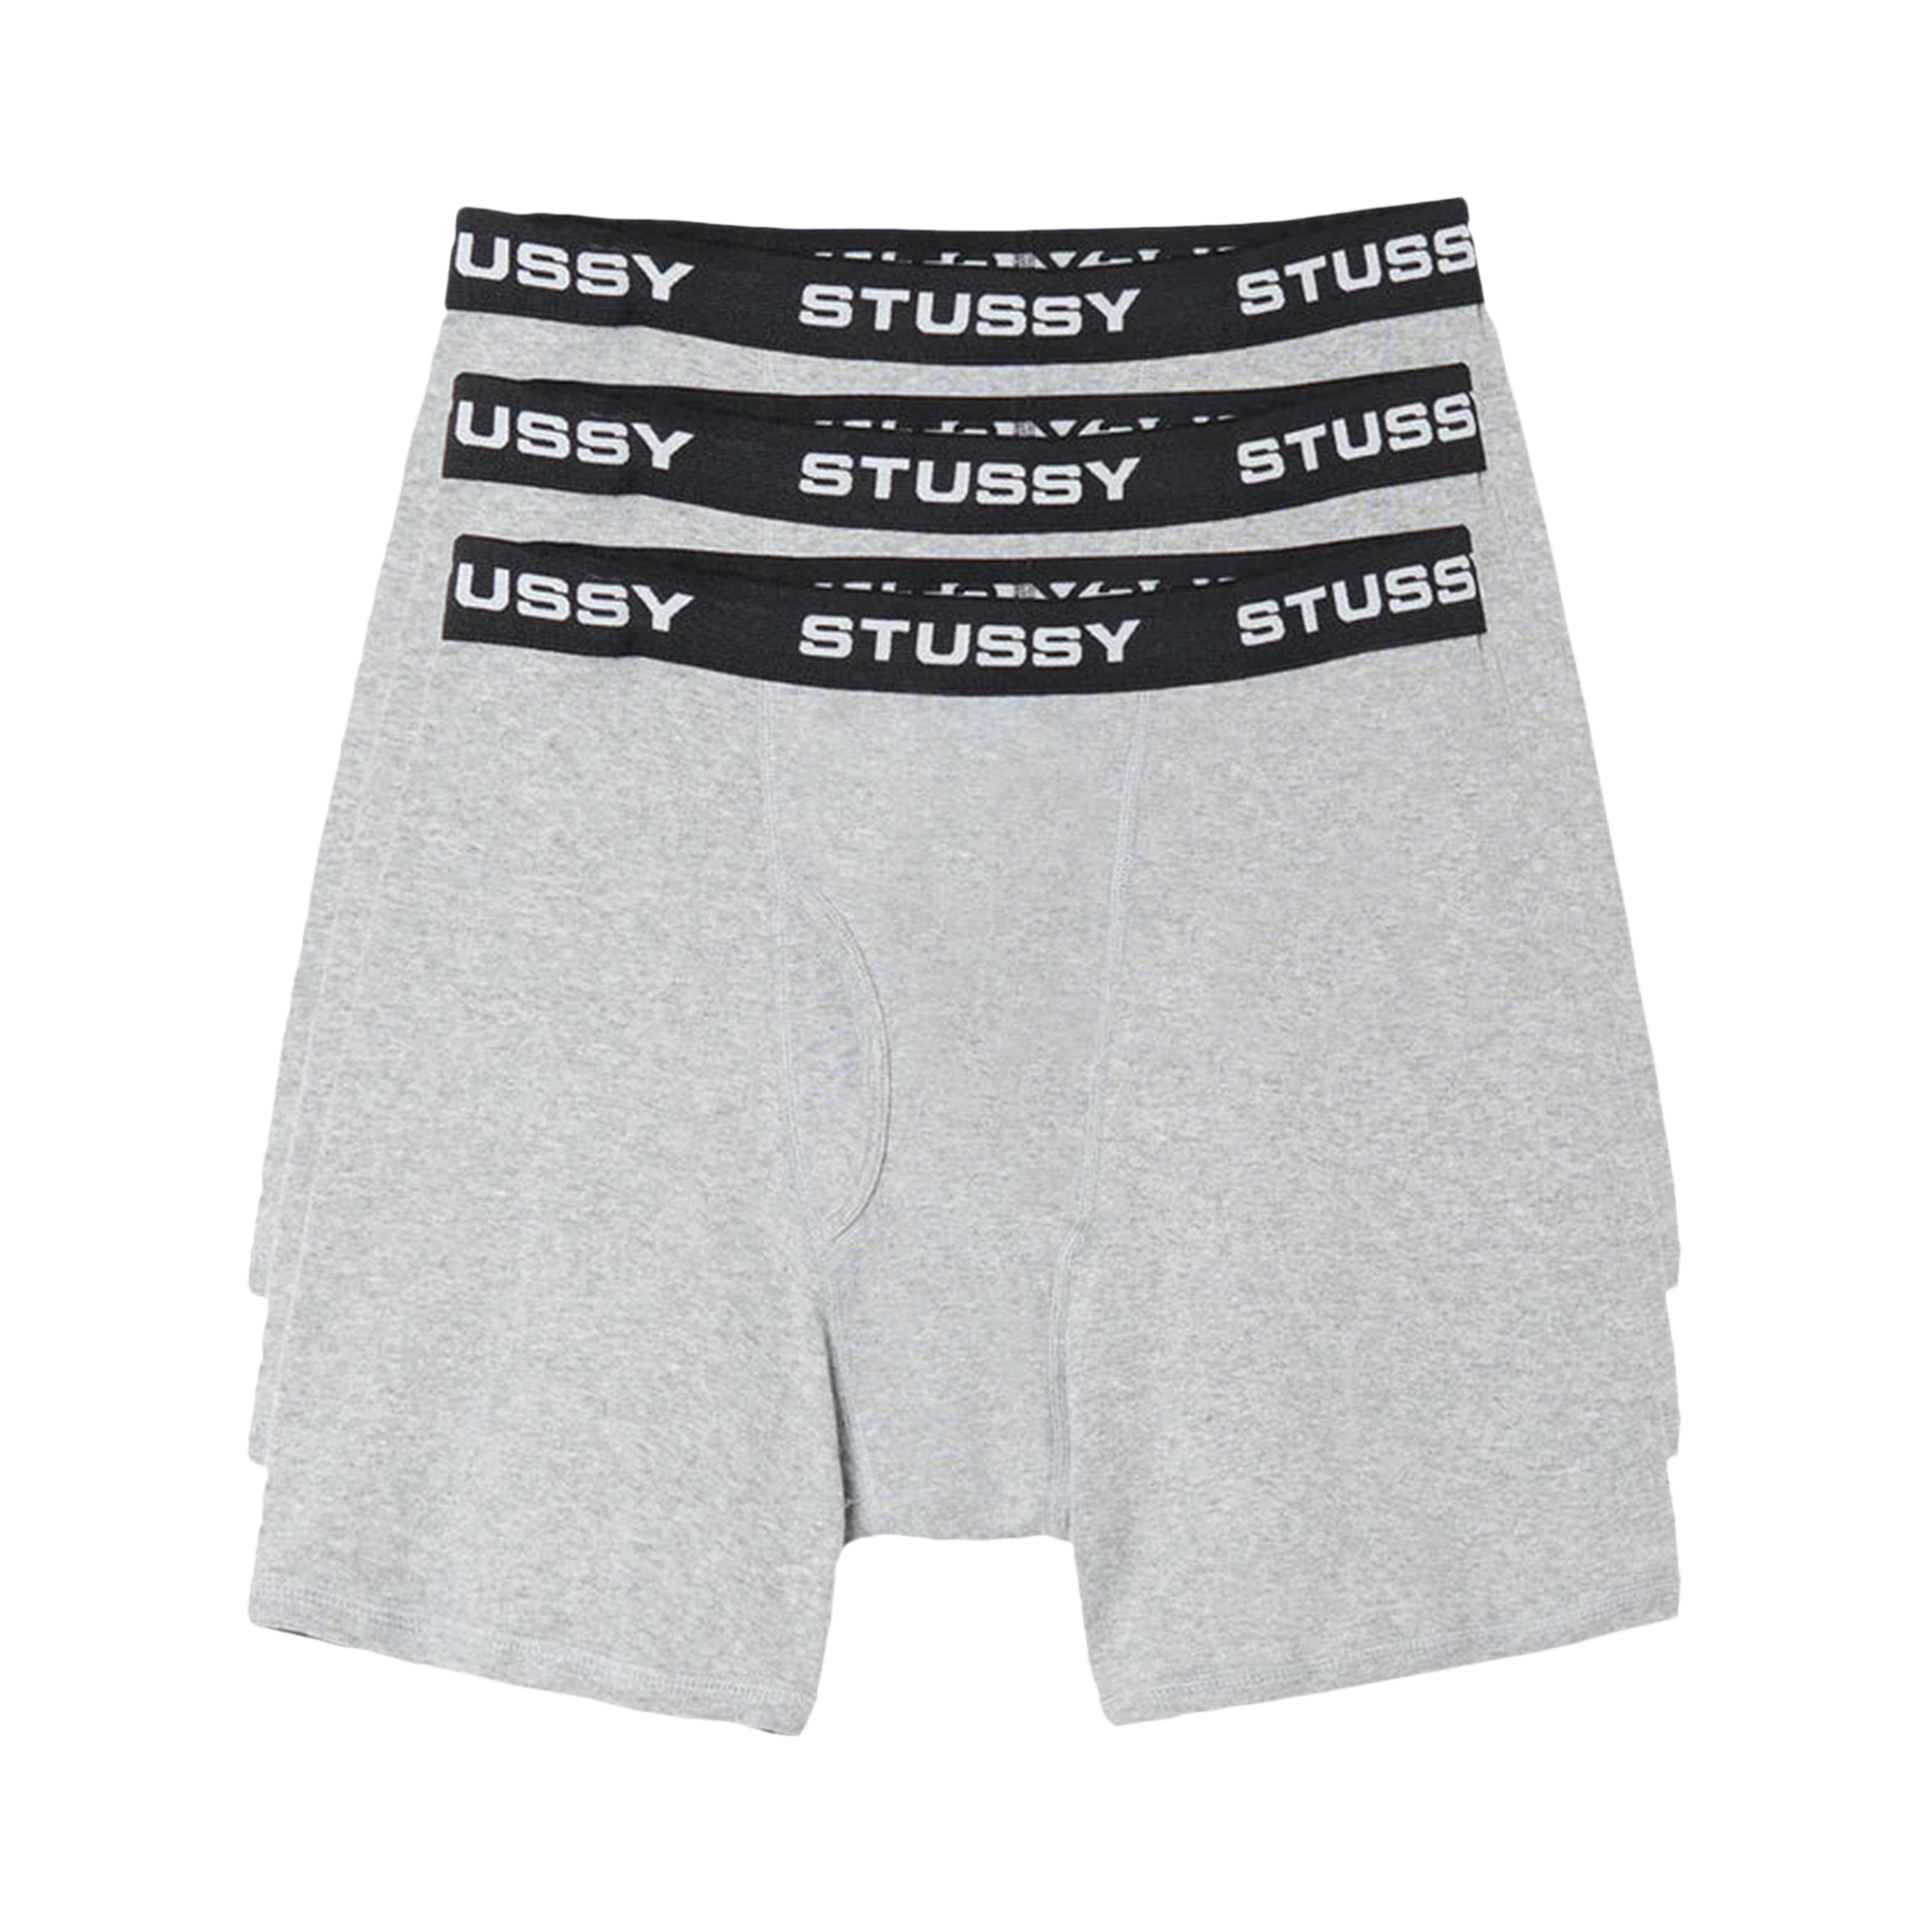 Pre-owned Stussy Boxer Briefs (3 Pack) 'grey Heather'